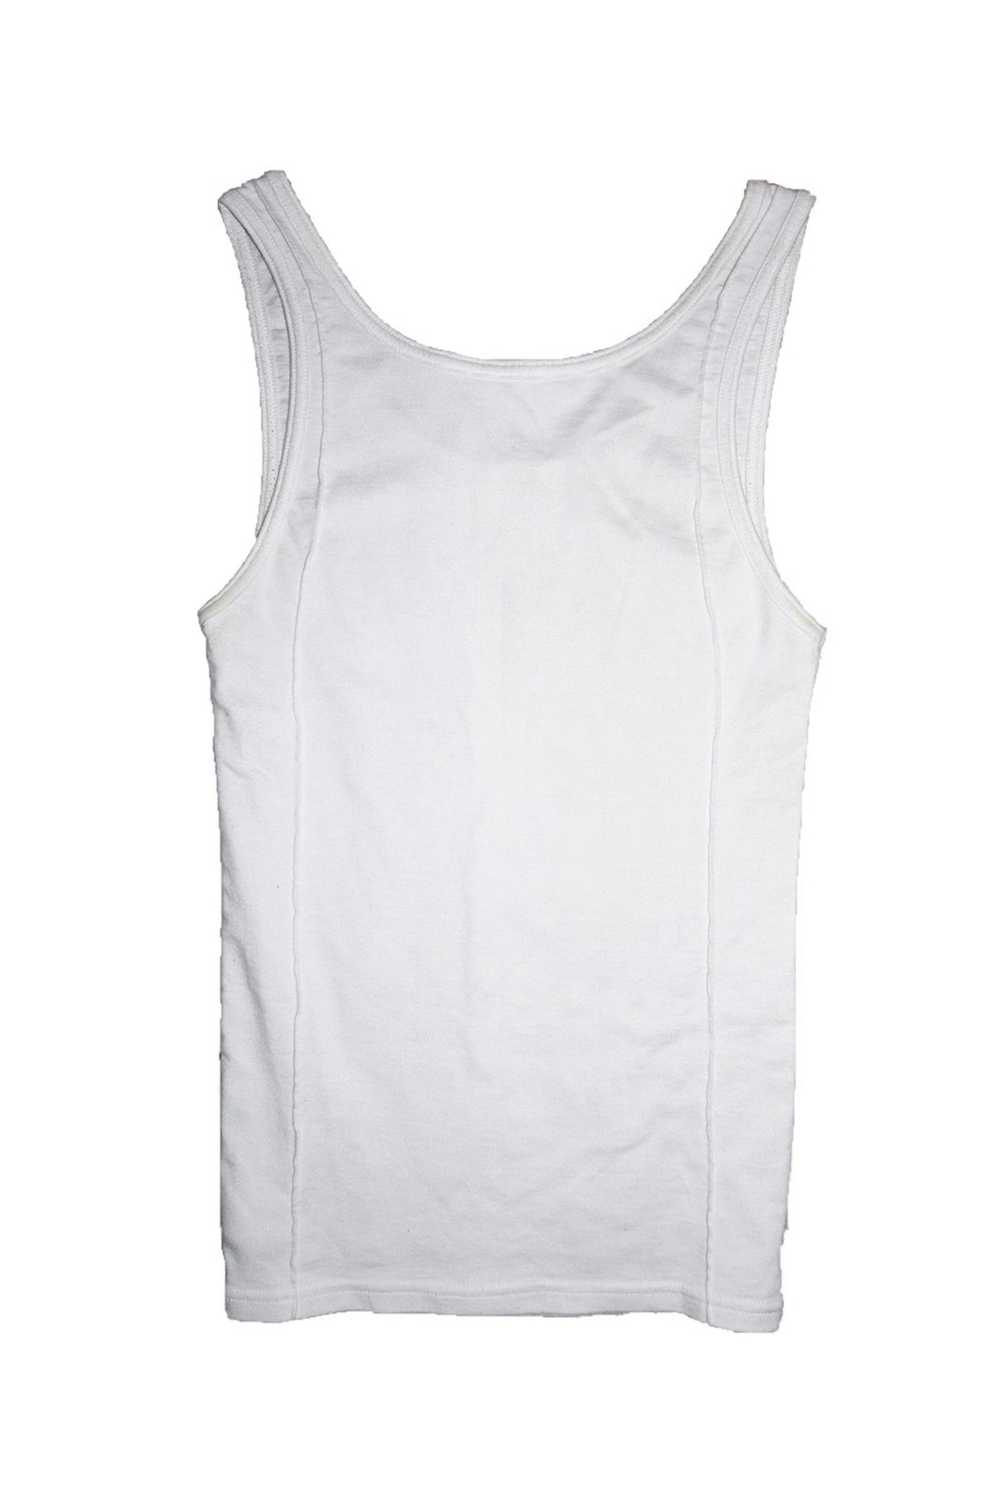 Peter Do Peter do creased tank top - image 4